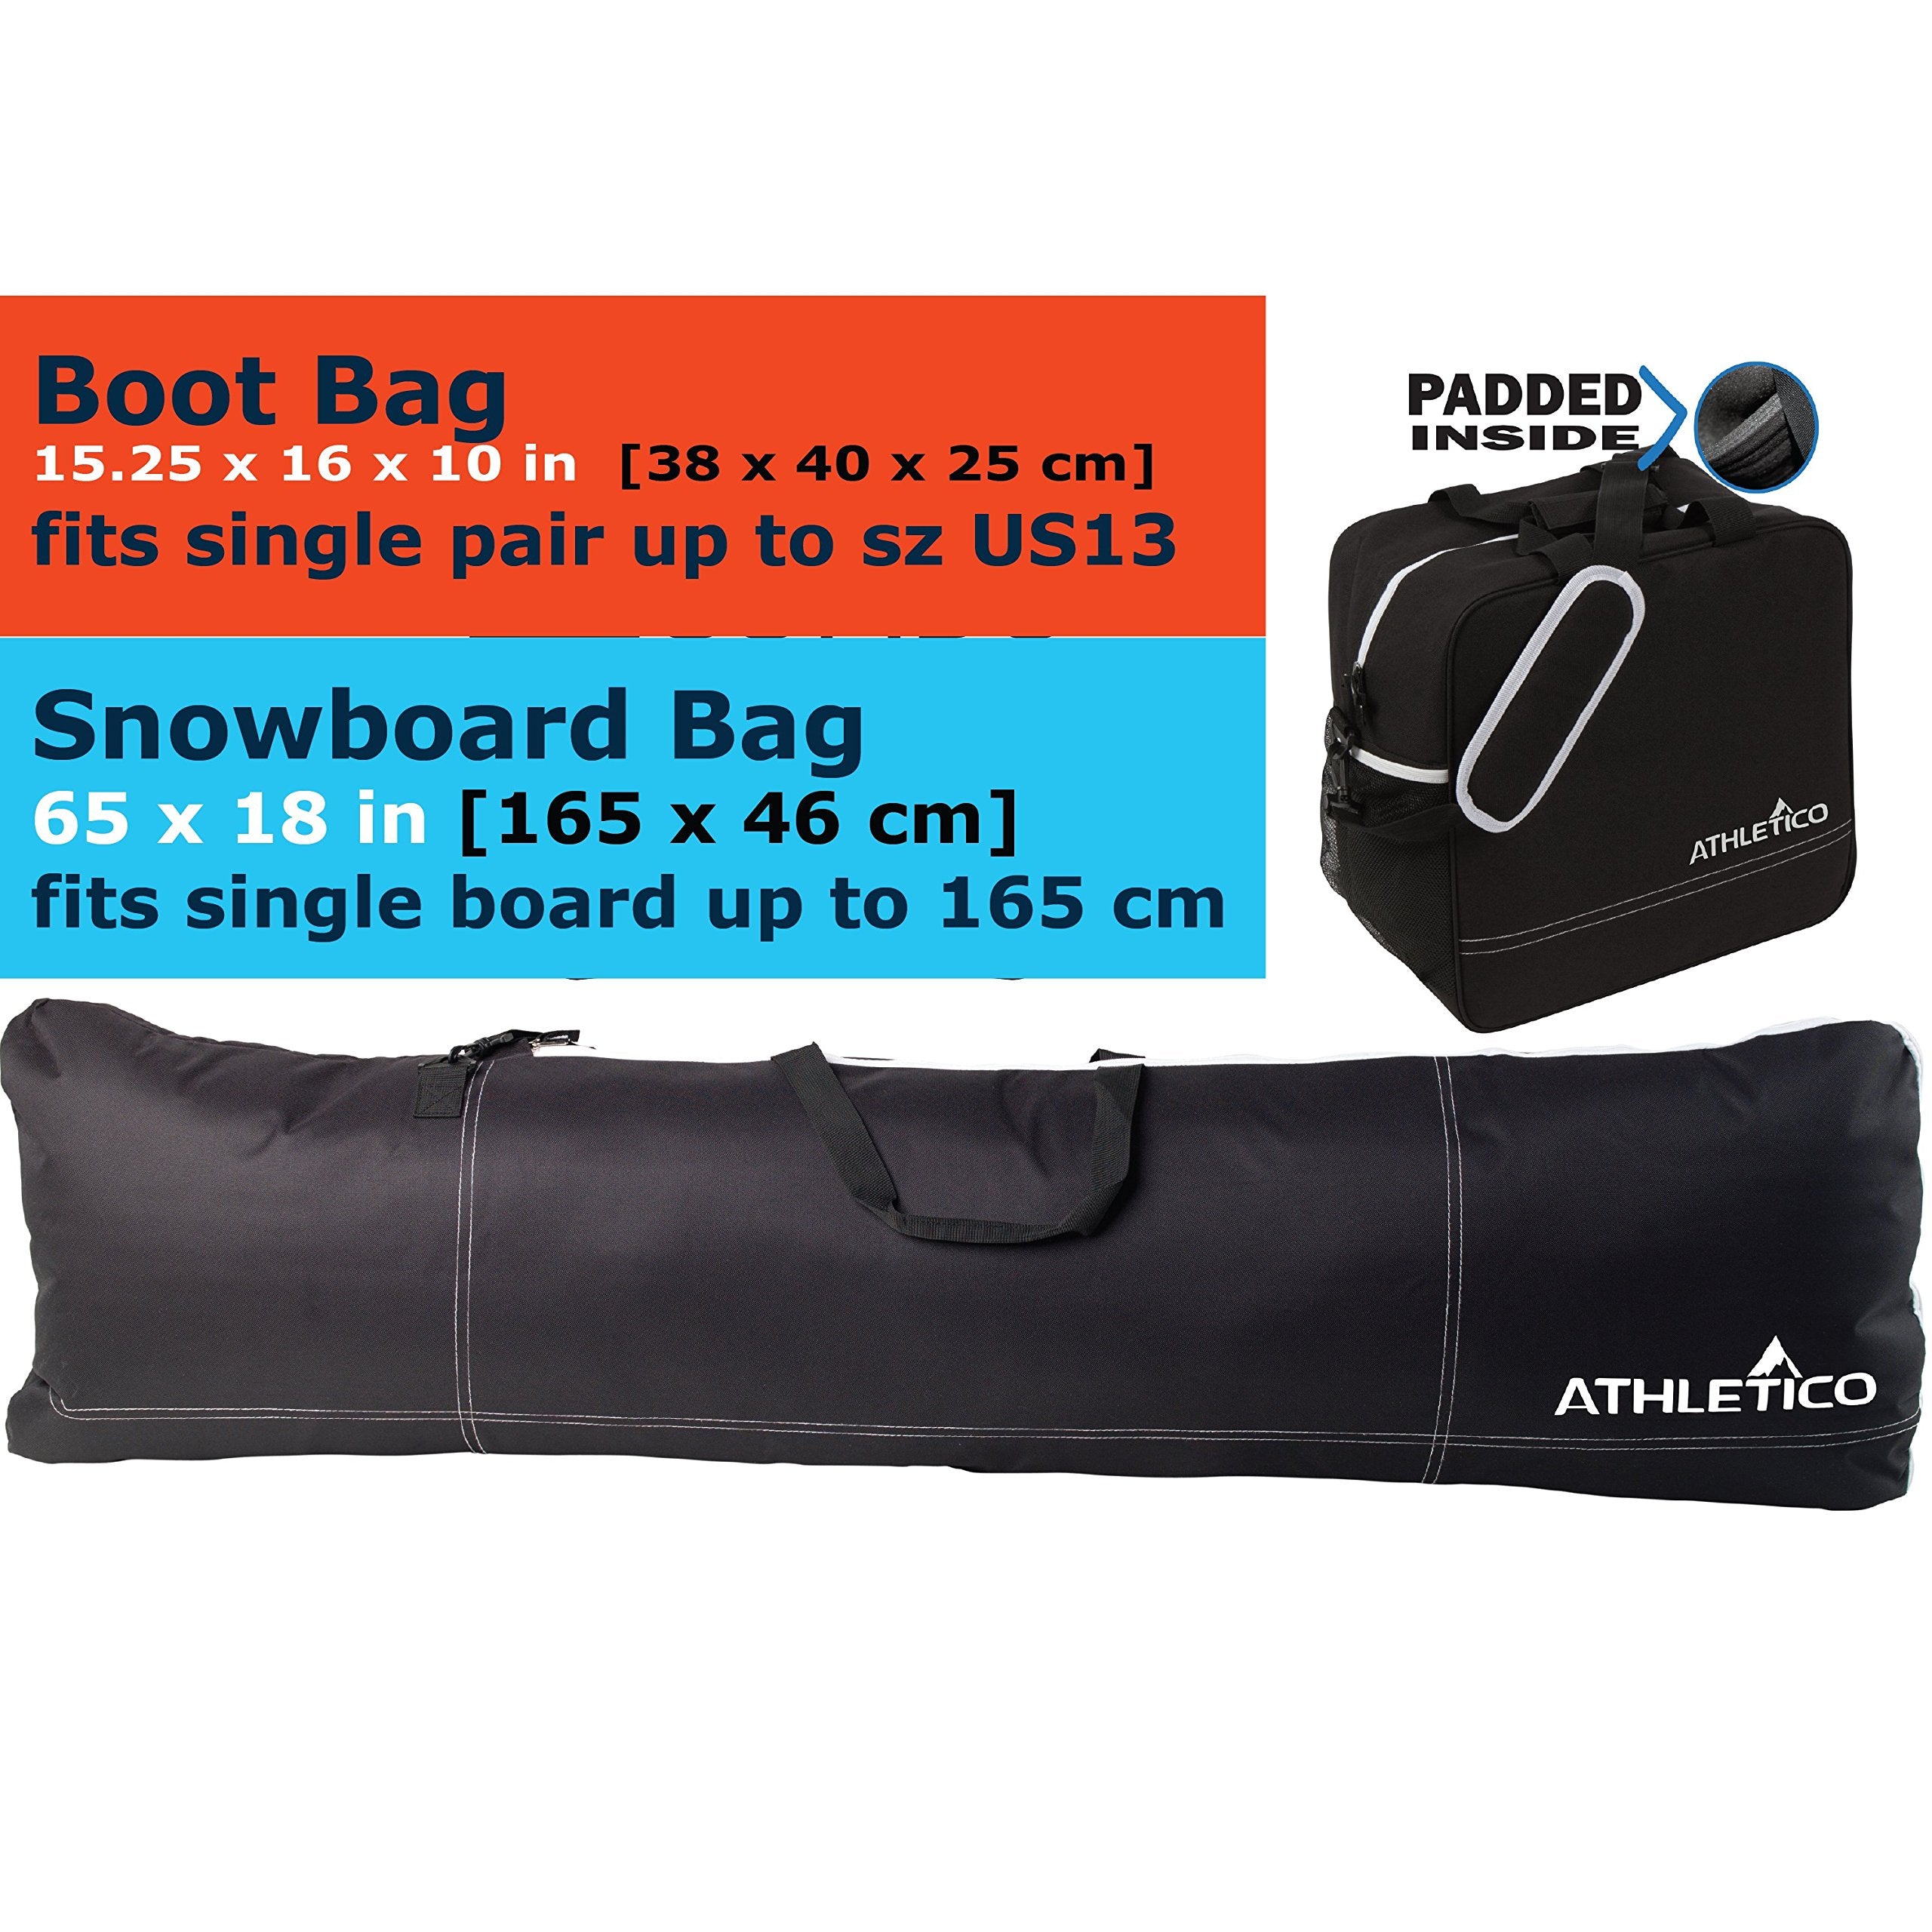 Athletico Padded Two-Piece Snowboard and Boot Bag Combo | Store & Transport Snowboard Up to 165 CM and Boots Up To Size 13 | Includes 1 Padded Snowboard Bag & 1 Padded Boot Bag  - Like New